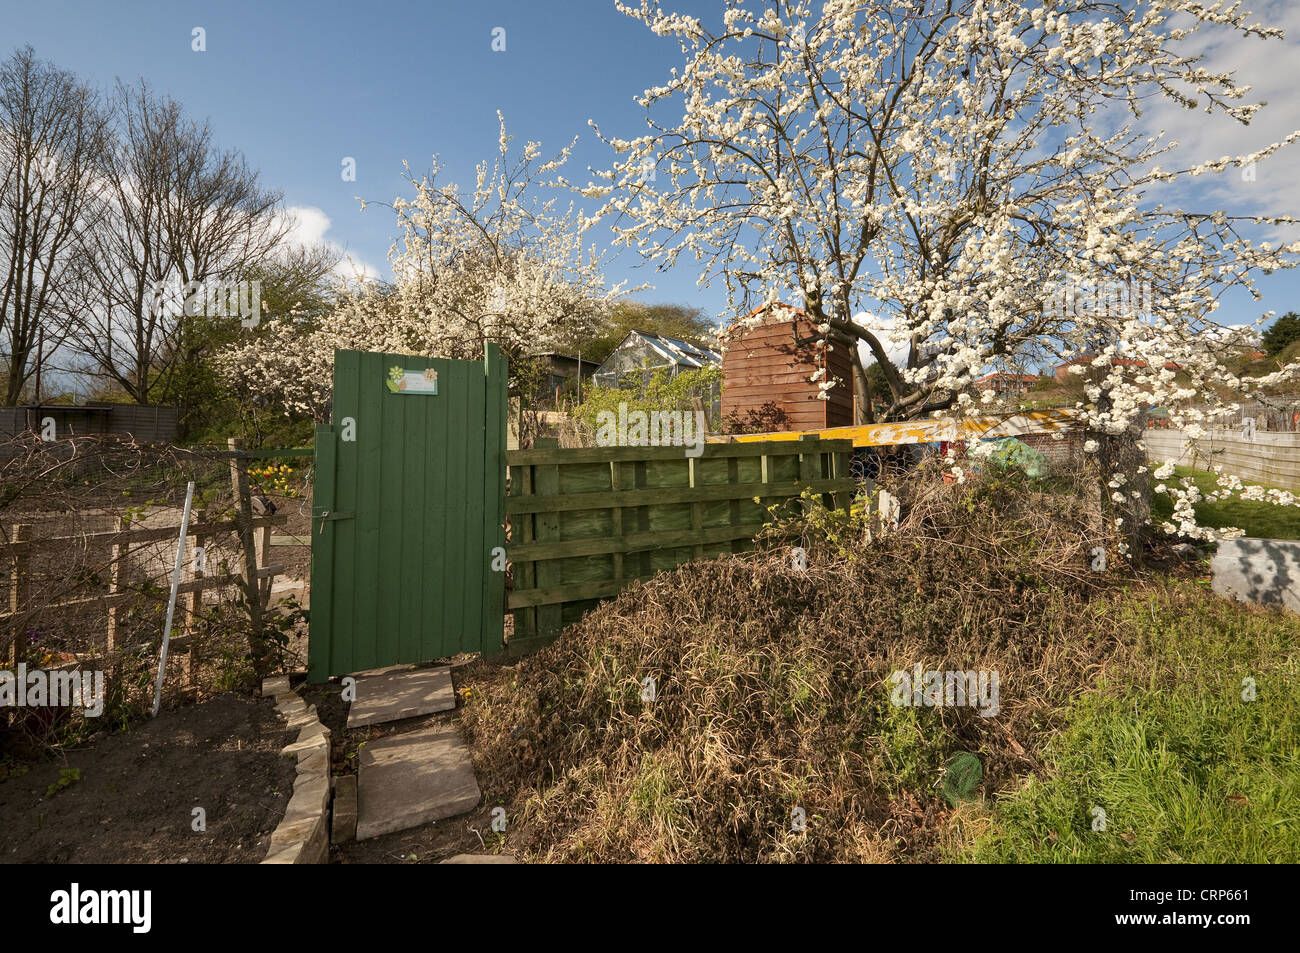 Gate in urban allotment garden with trees in blossom, Norwich, Norfolk, England, april Stock Photo